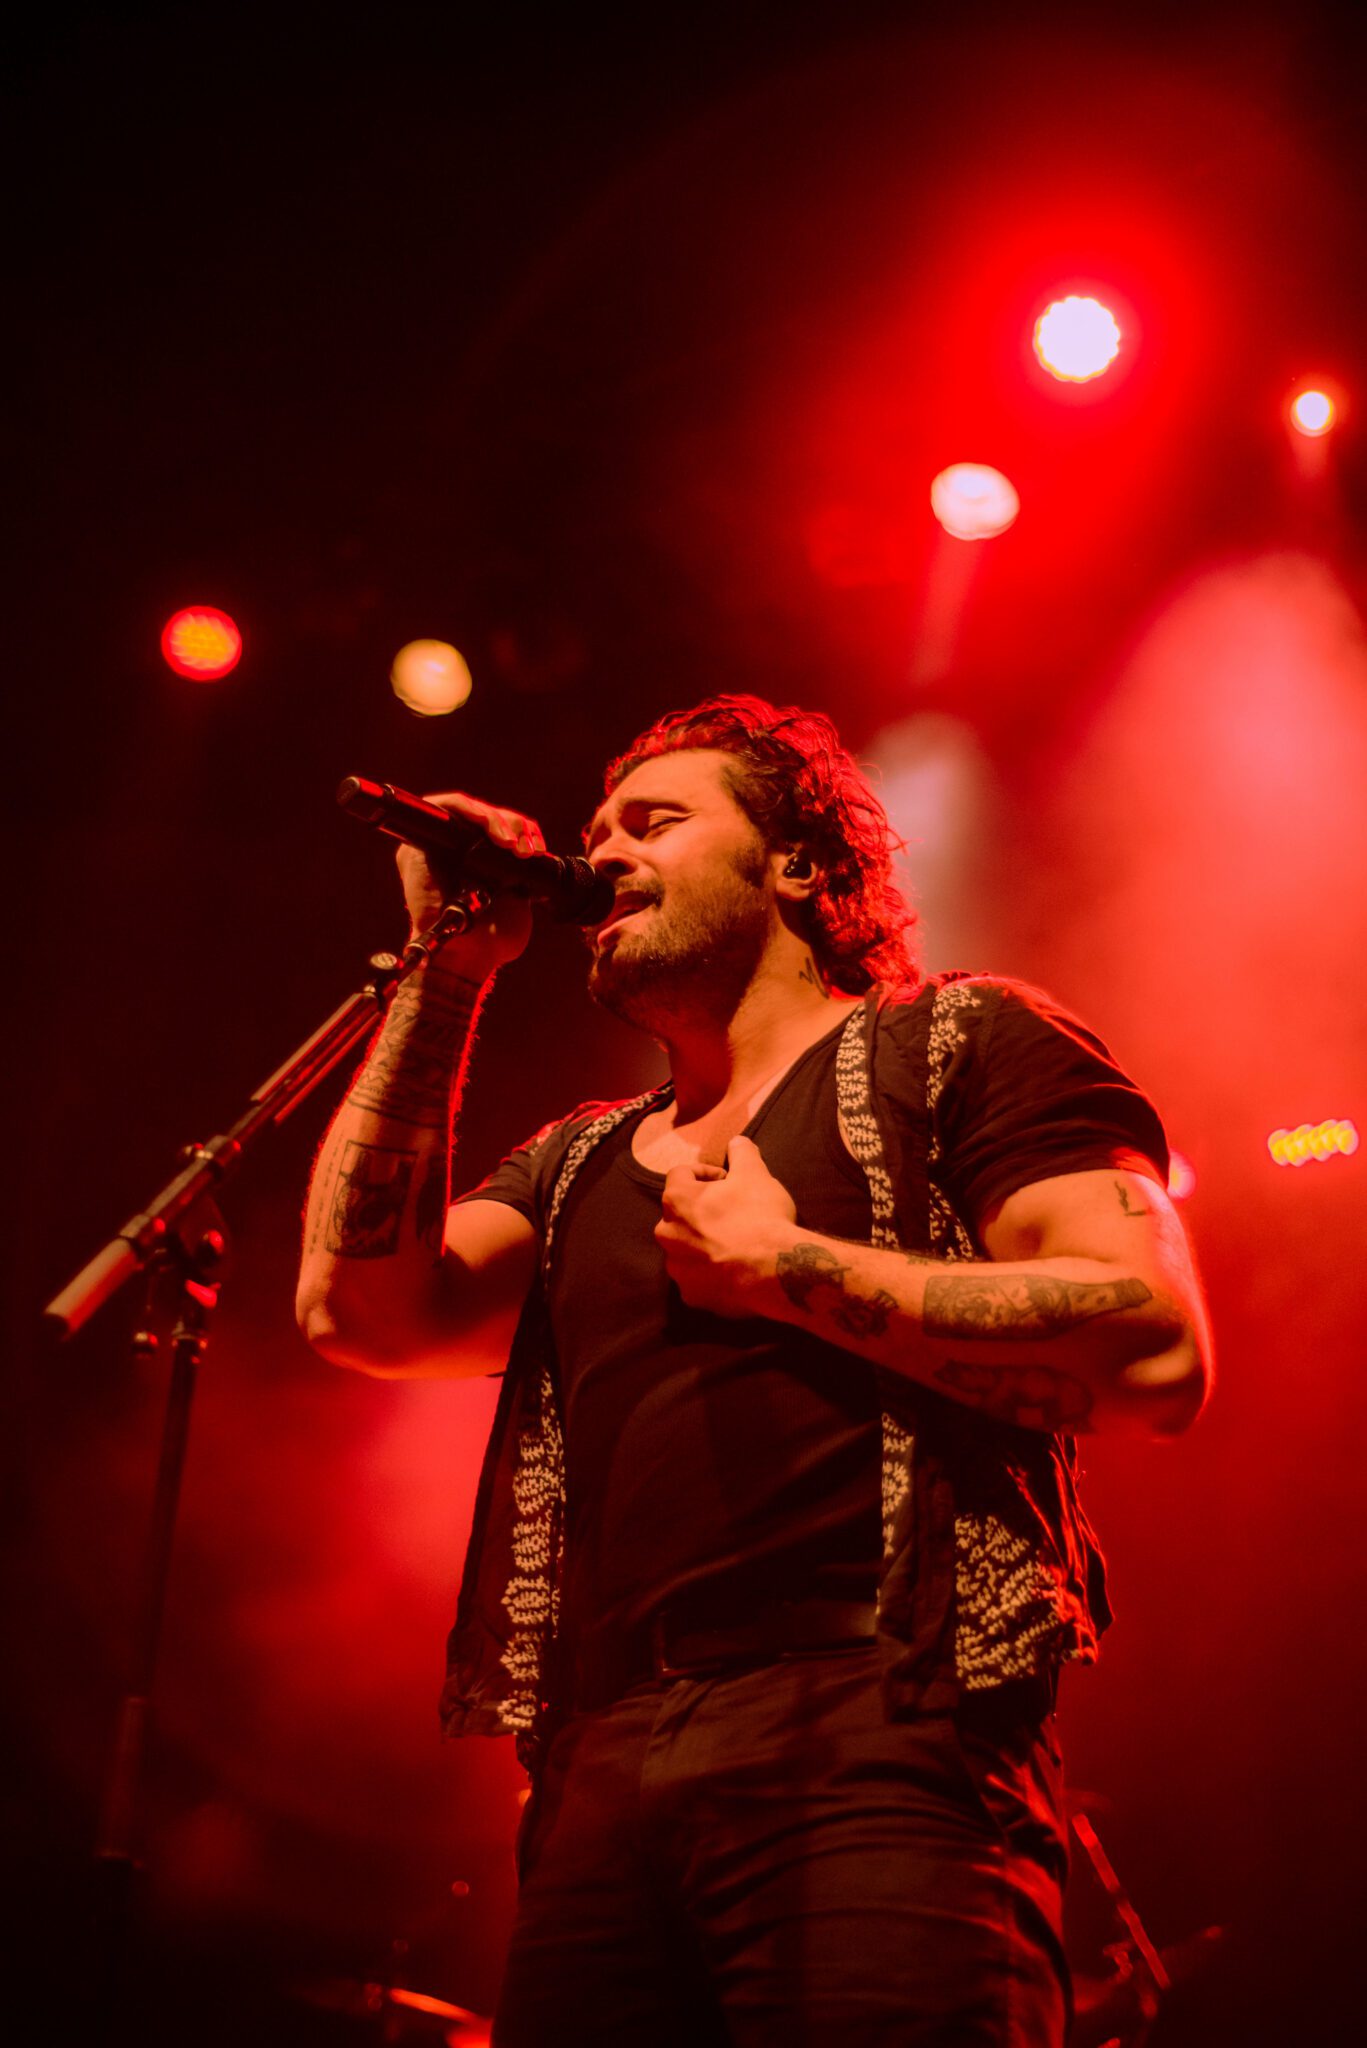 Gang of Youths performing at Danforth Music Hall in Toronto